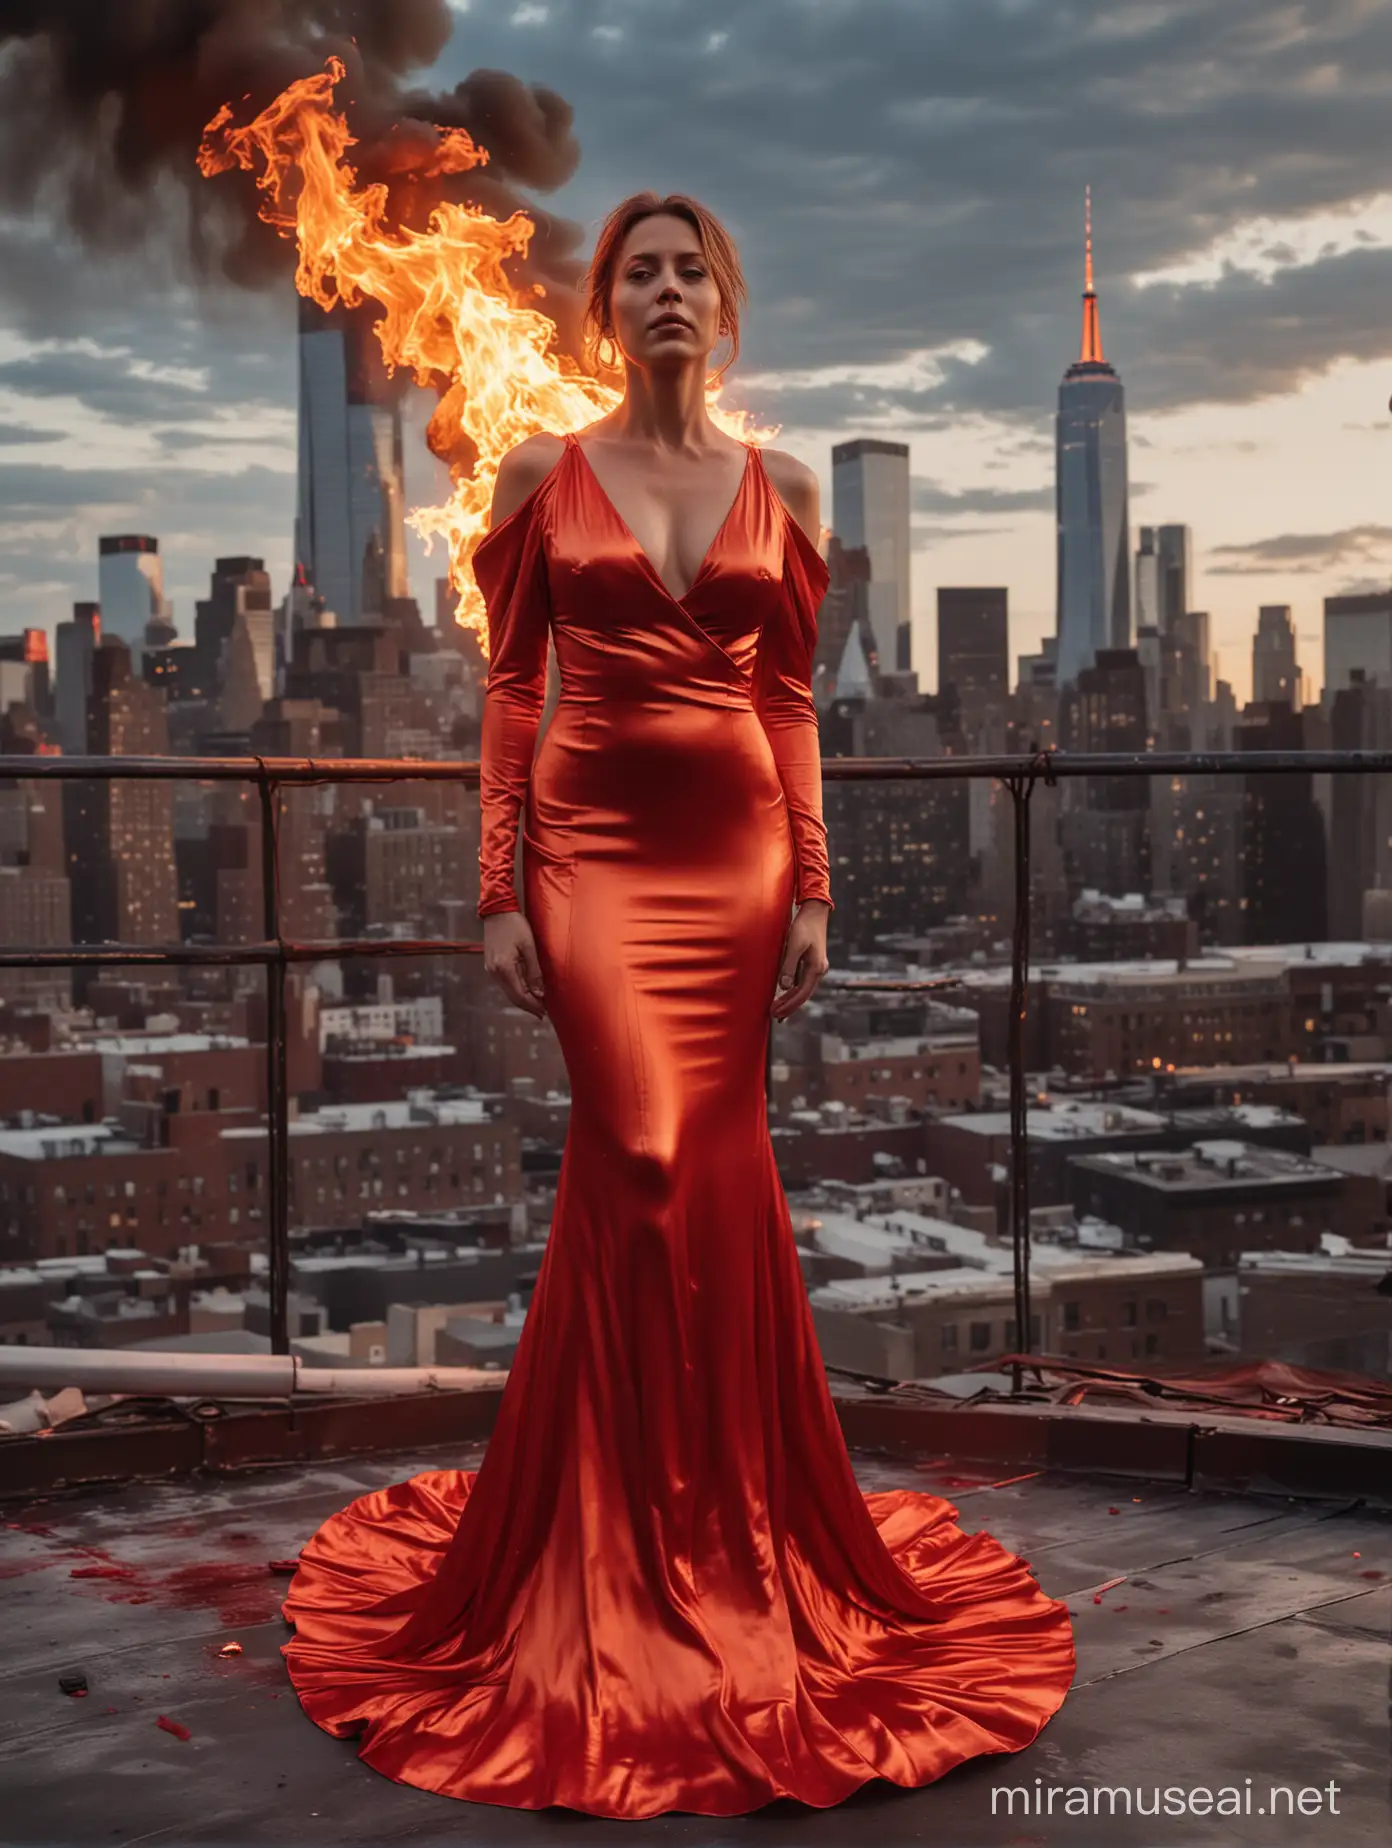 A 35-year-old woman in a burning satin dress with red slits poses on the roof. The woman's dress and shoulders are burning. The woman is in flames. The woman looks calm and strong while burning. The background is New York.